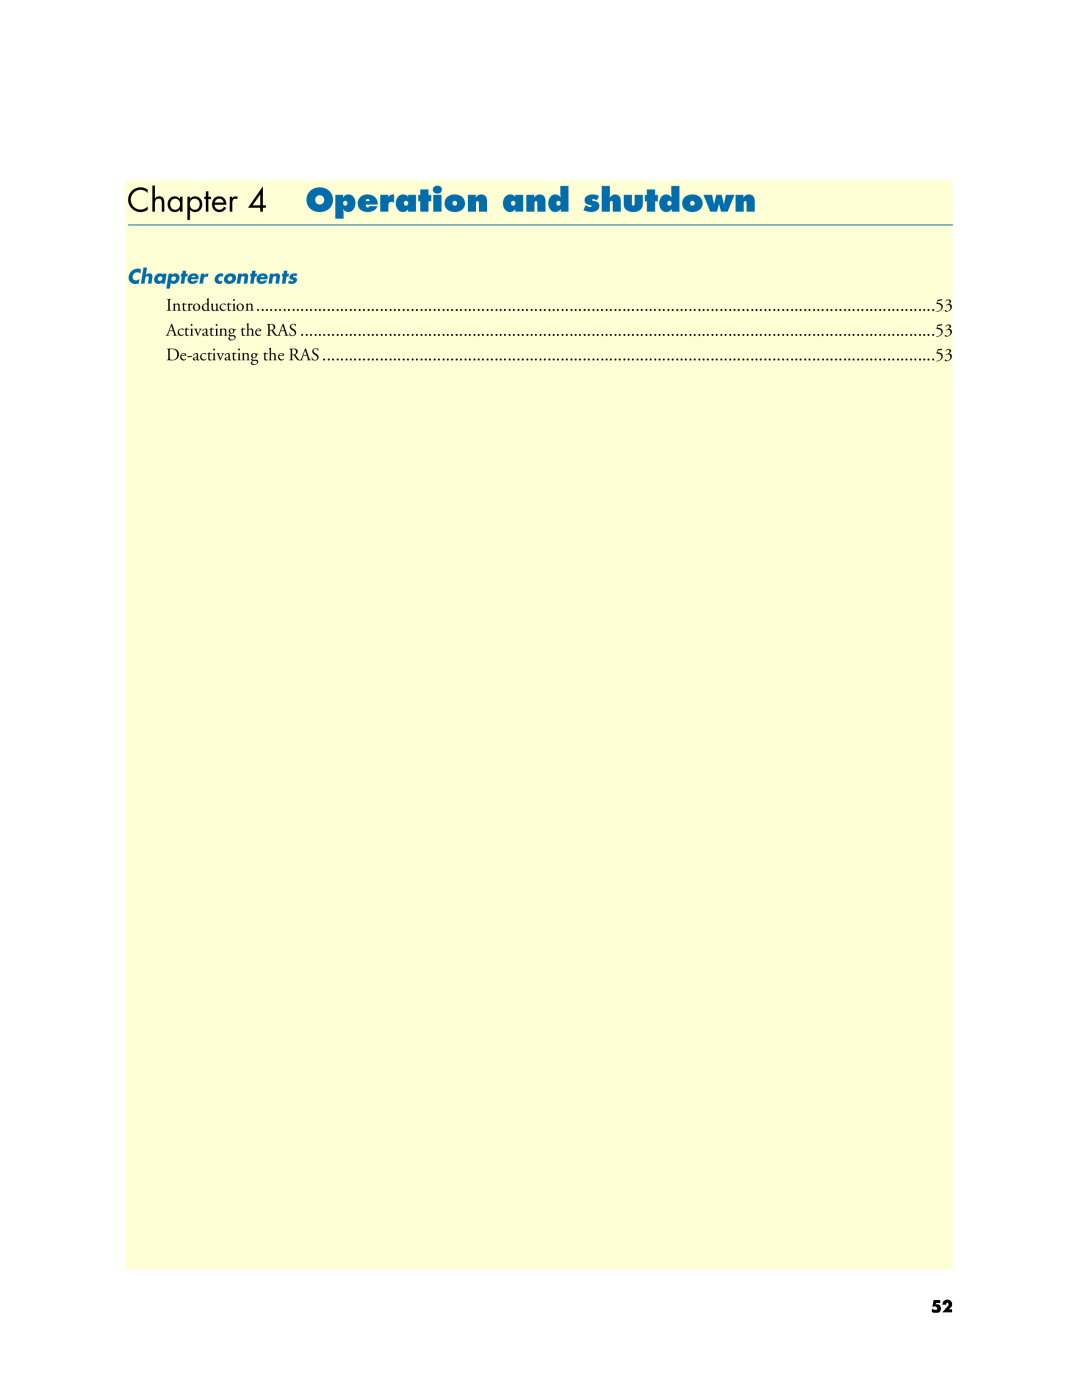 Black Box LRA2900A manual Operation and shutdown, Chapter contents 